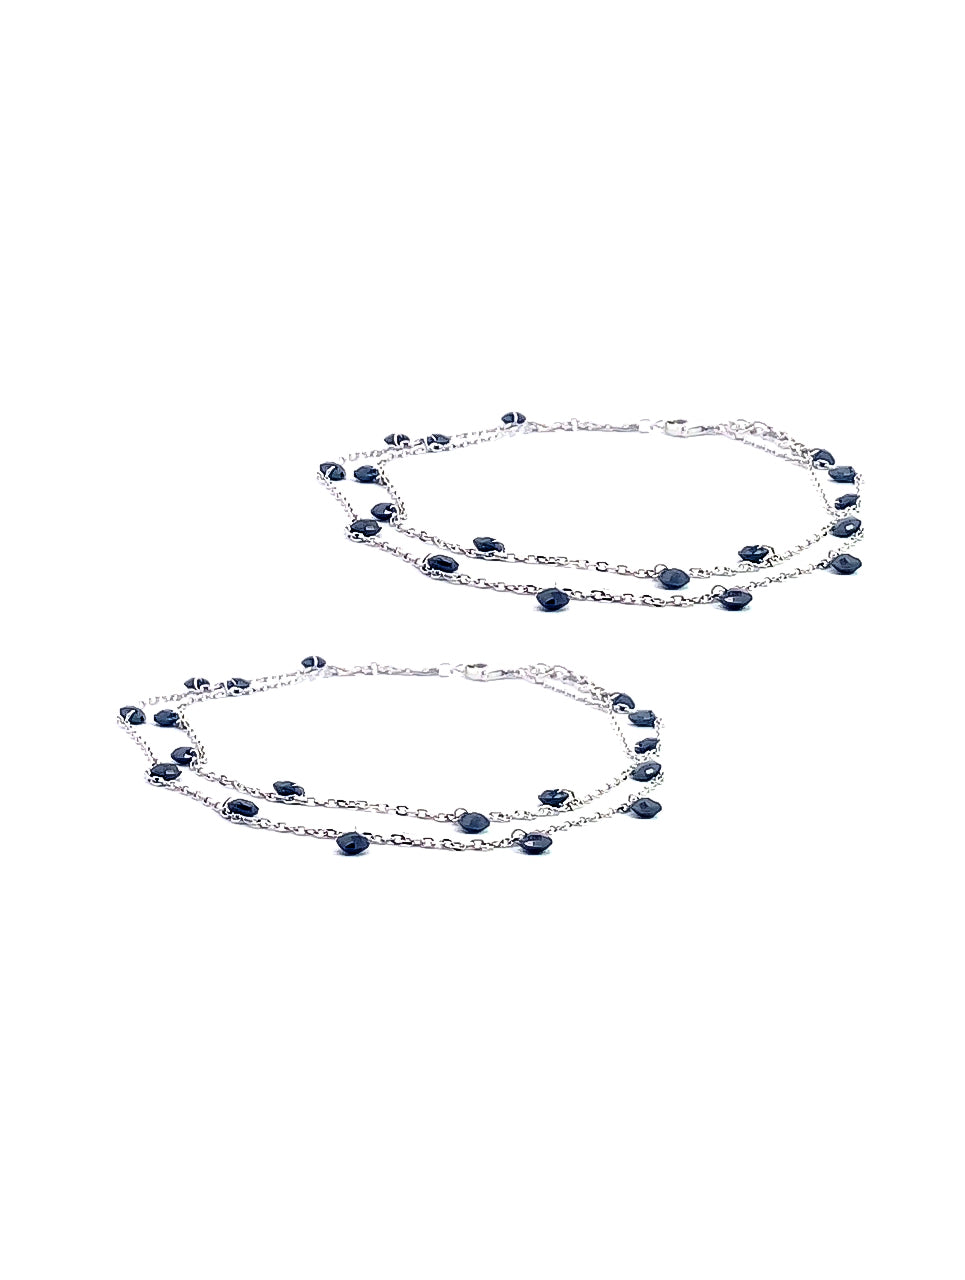 ANKLETS (STYLE 1723)